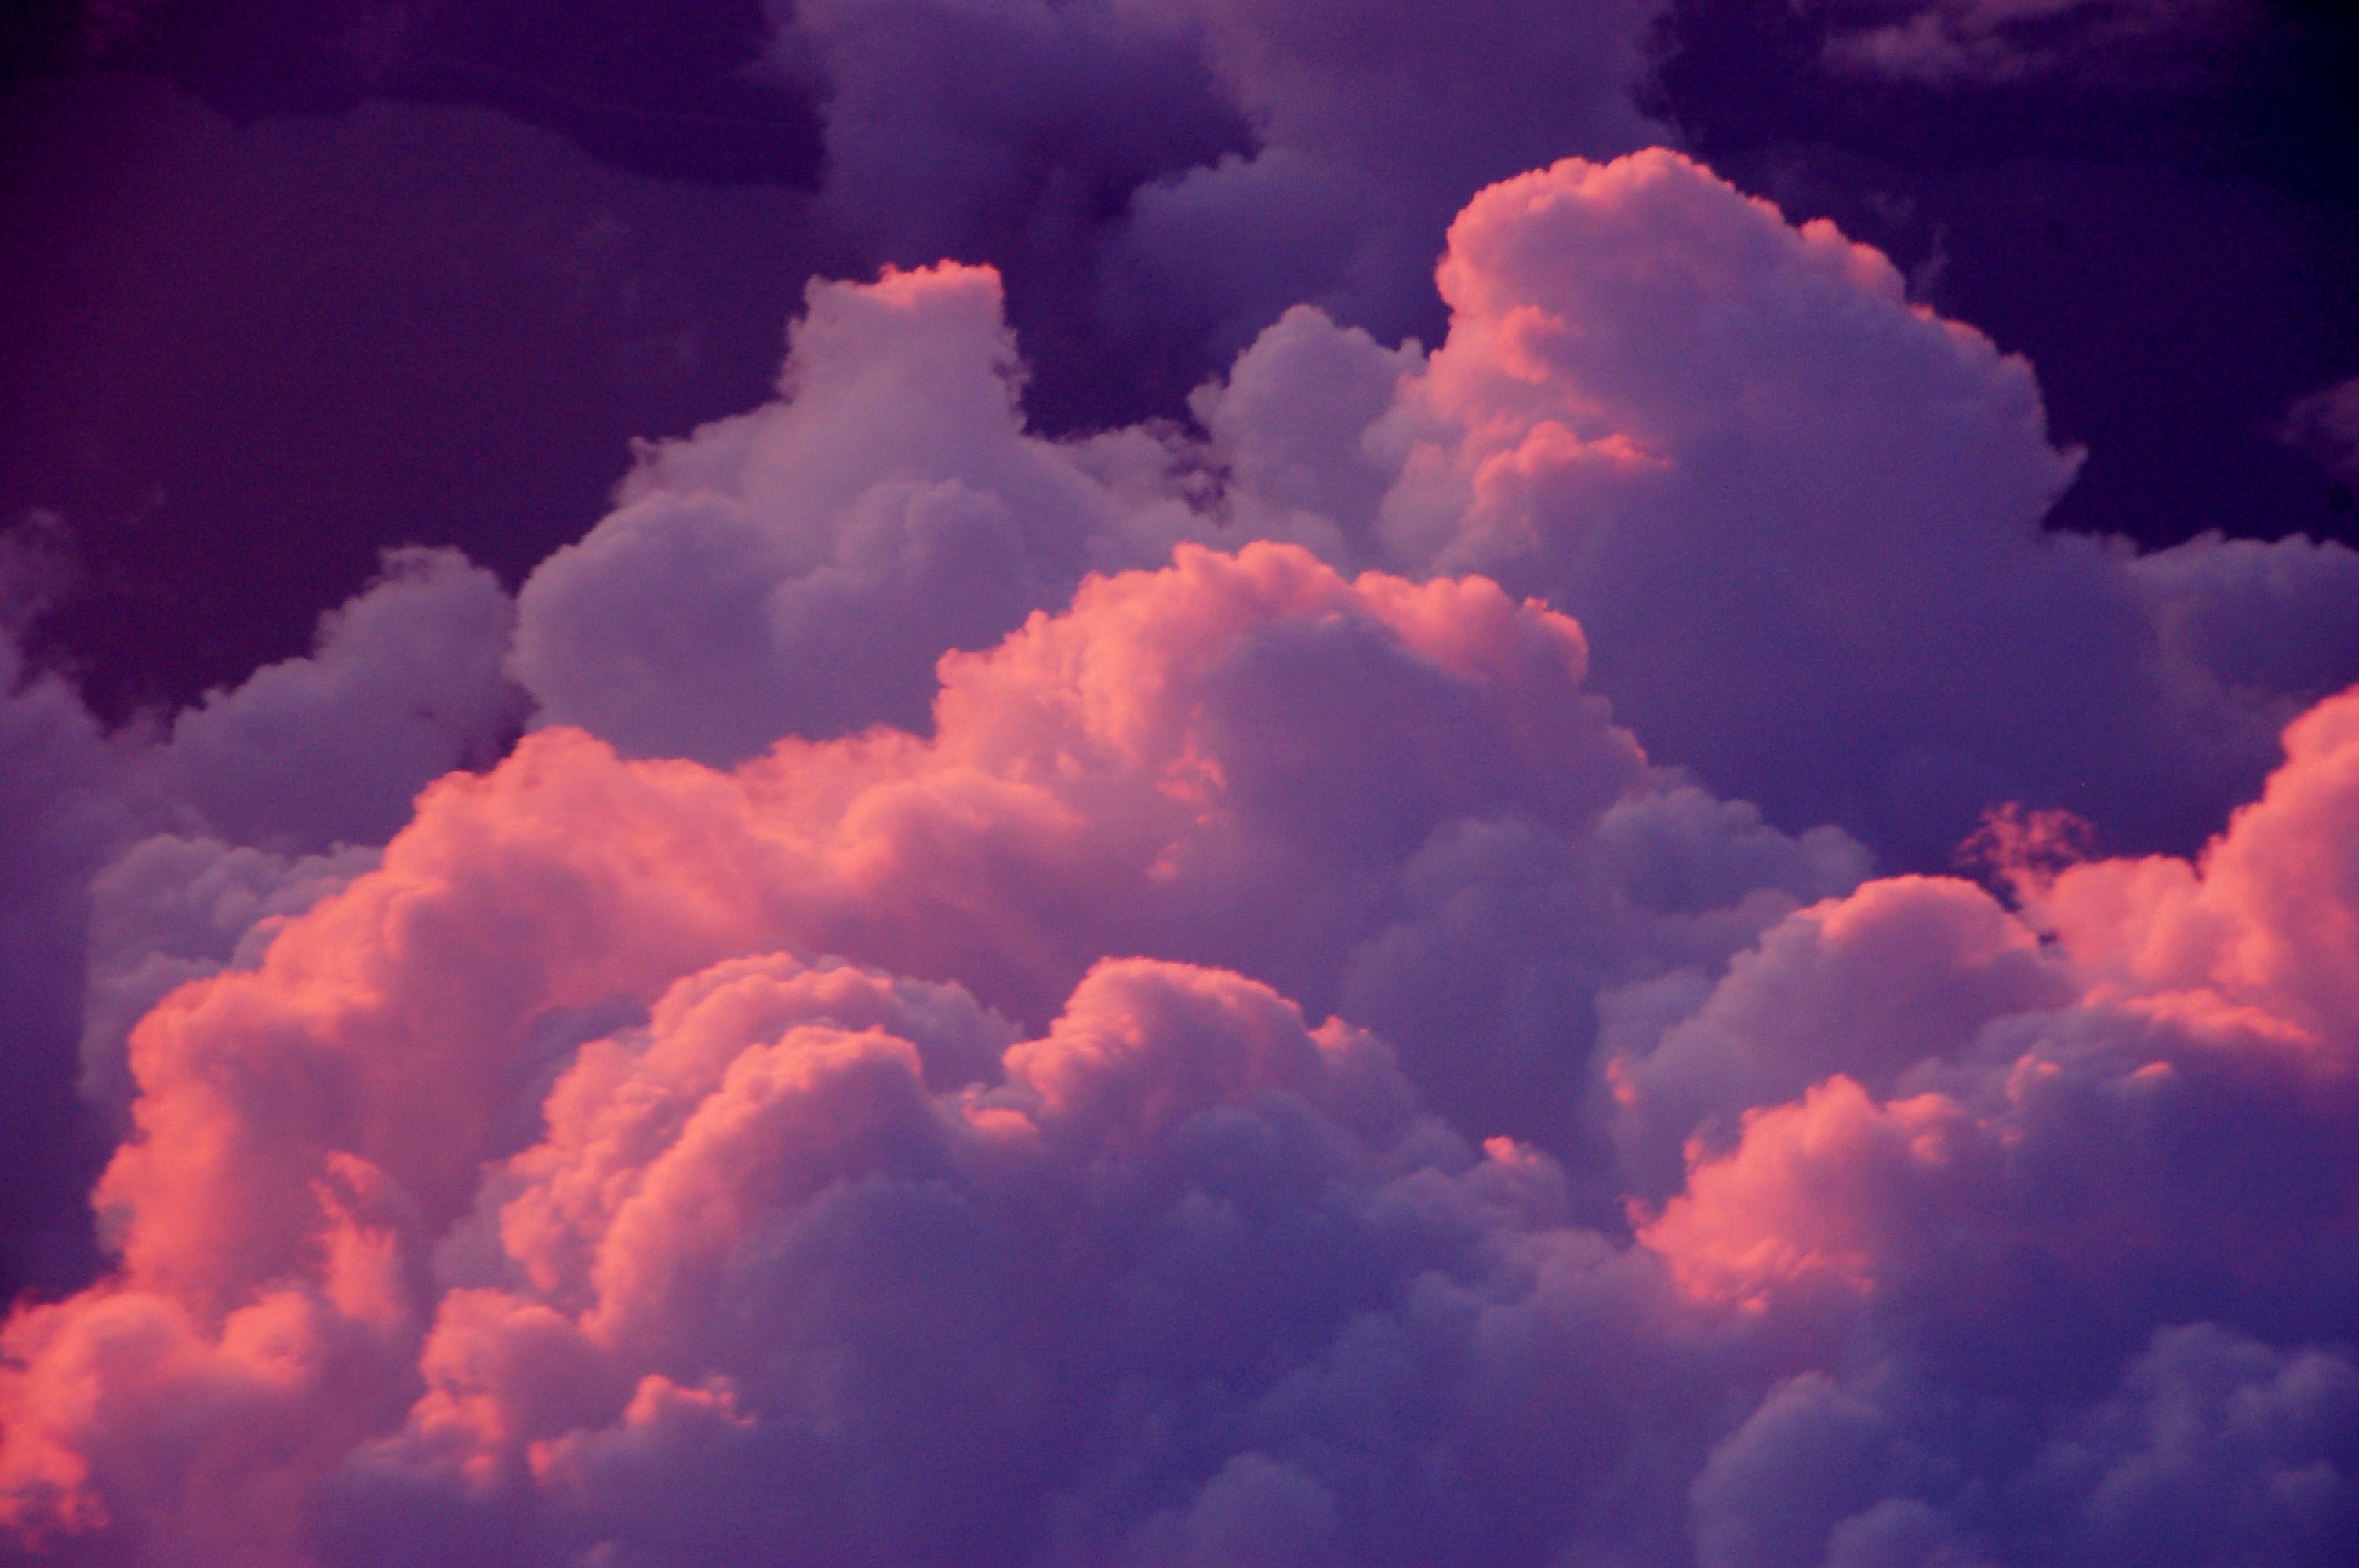 A sky filled with clouds of varying sizes and shades of pink and purple. - Desktop, cloud, YouTube, vintage clouds